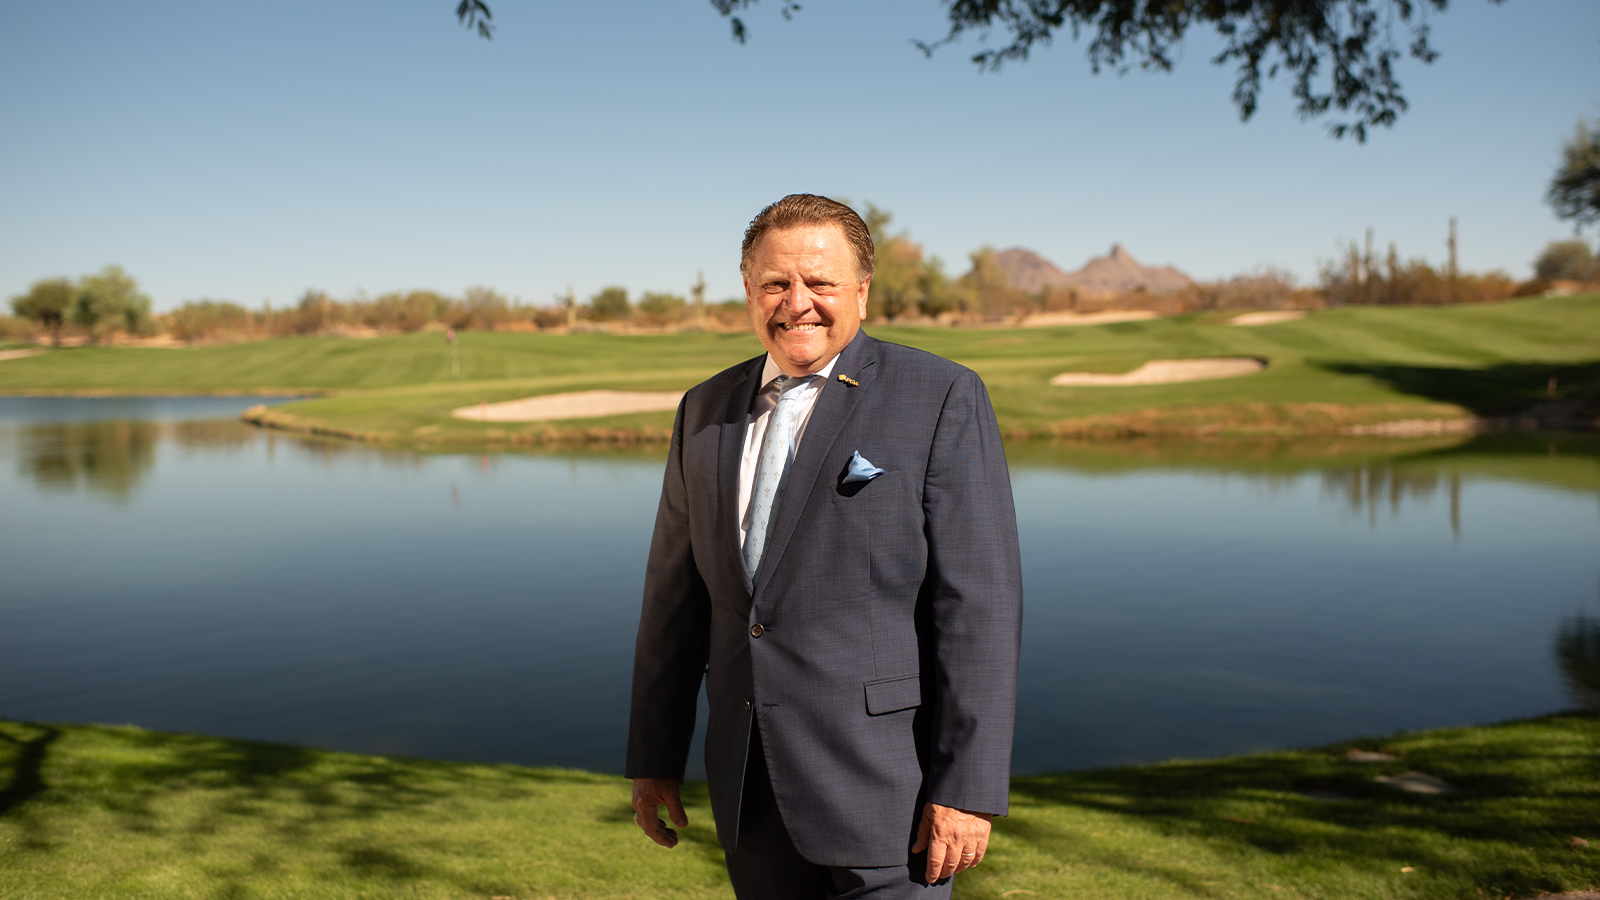 PGA of America Past President, Paul Levy poses for a photo during the 104th PGA Annual Meeting at Grayhawk Golf Club on October 29, 2020 in Scottsdale, AZ. (Photo by Traci Edwards/The PGA of America)